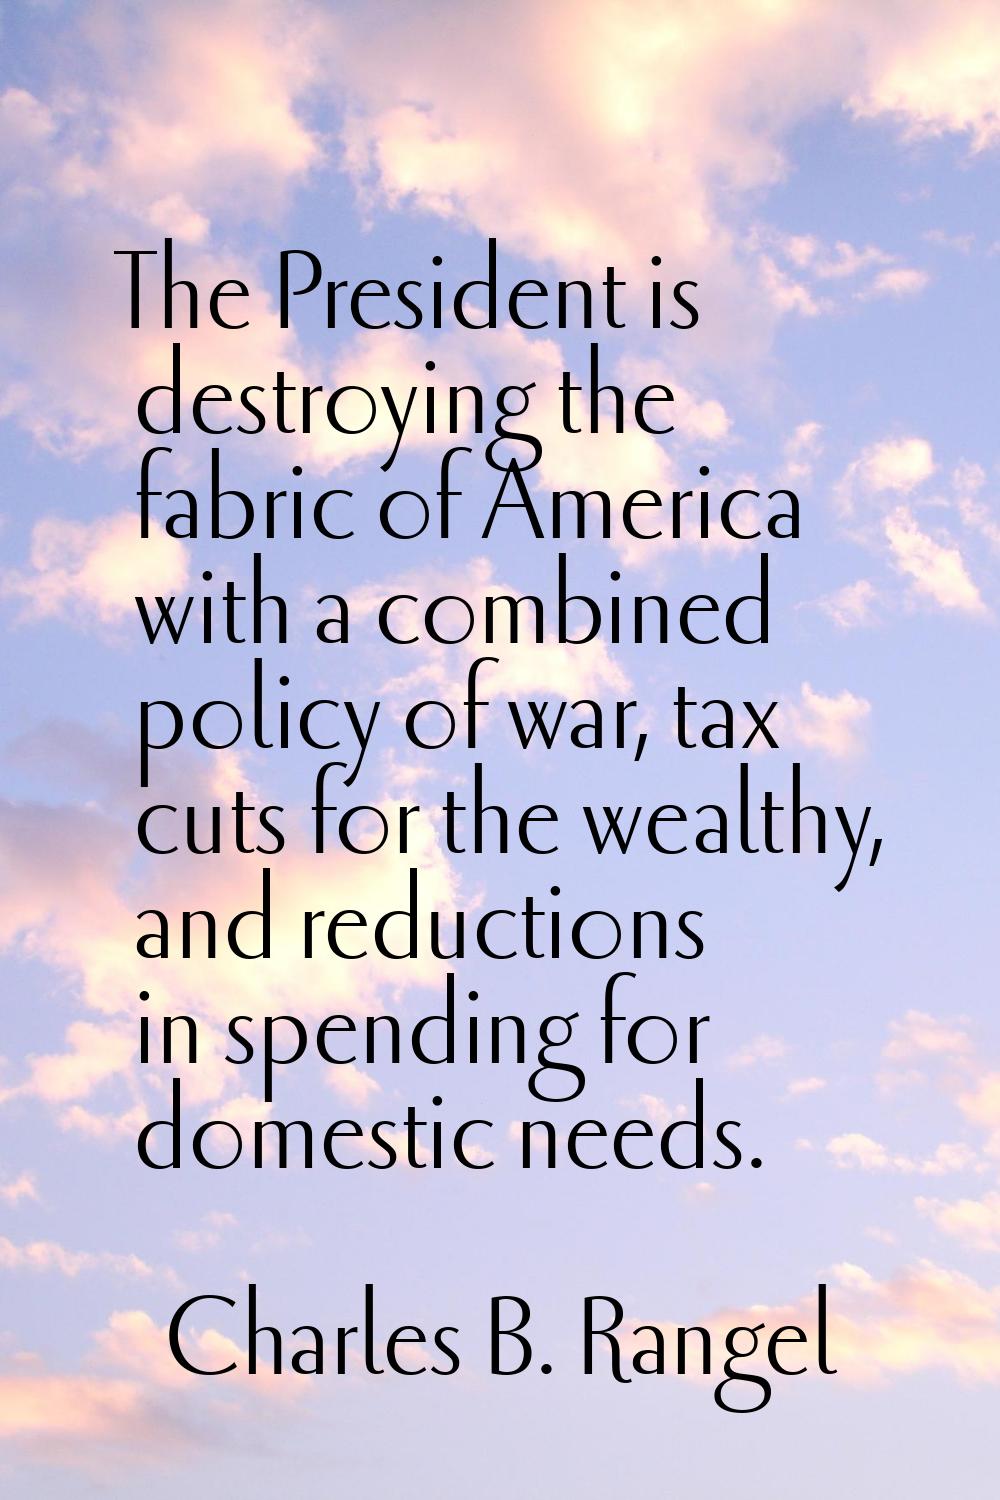 The President is destroying the fabric of America with a combined policy of war, tax cuts for the w